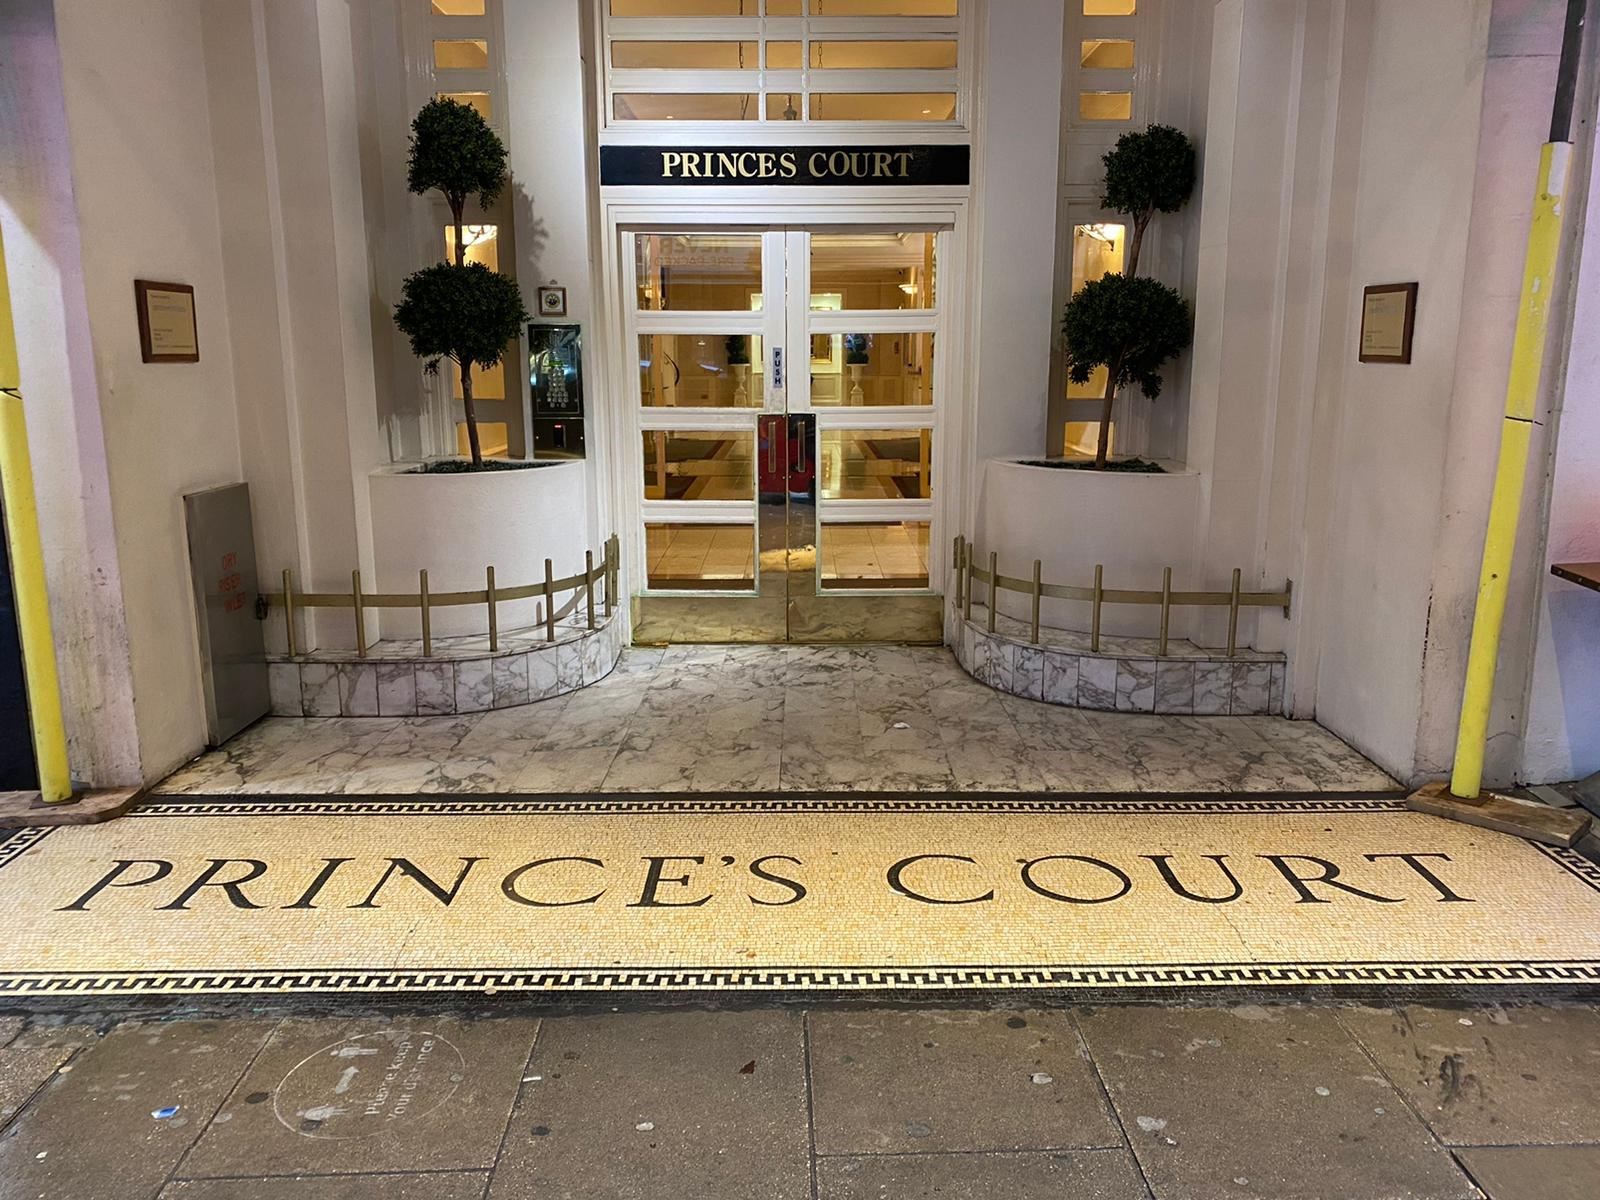 Princes Court in Knightsbridge, the location of Flat M, one of the seized properties (NCA/PA)